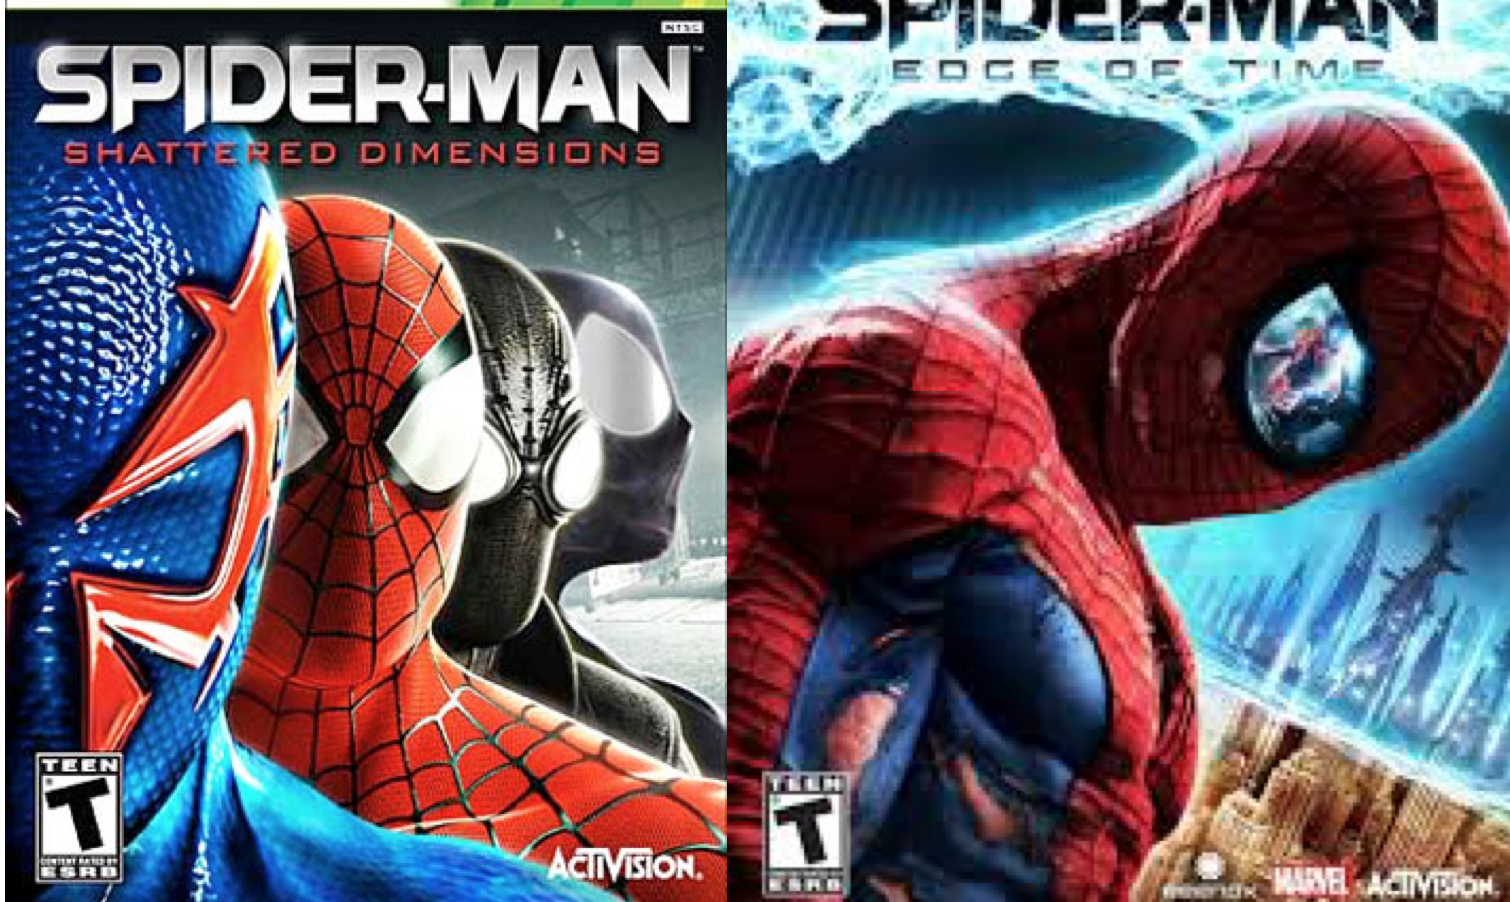 Amazing Spider Games Pt 2 Shattered Dimensions And Edge Of